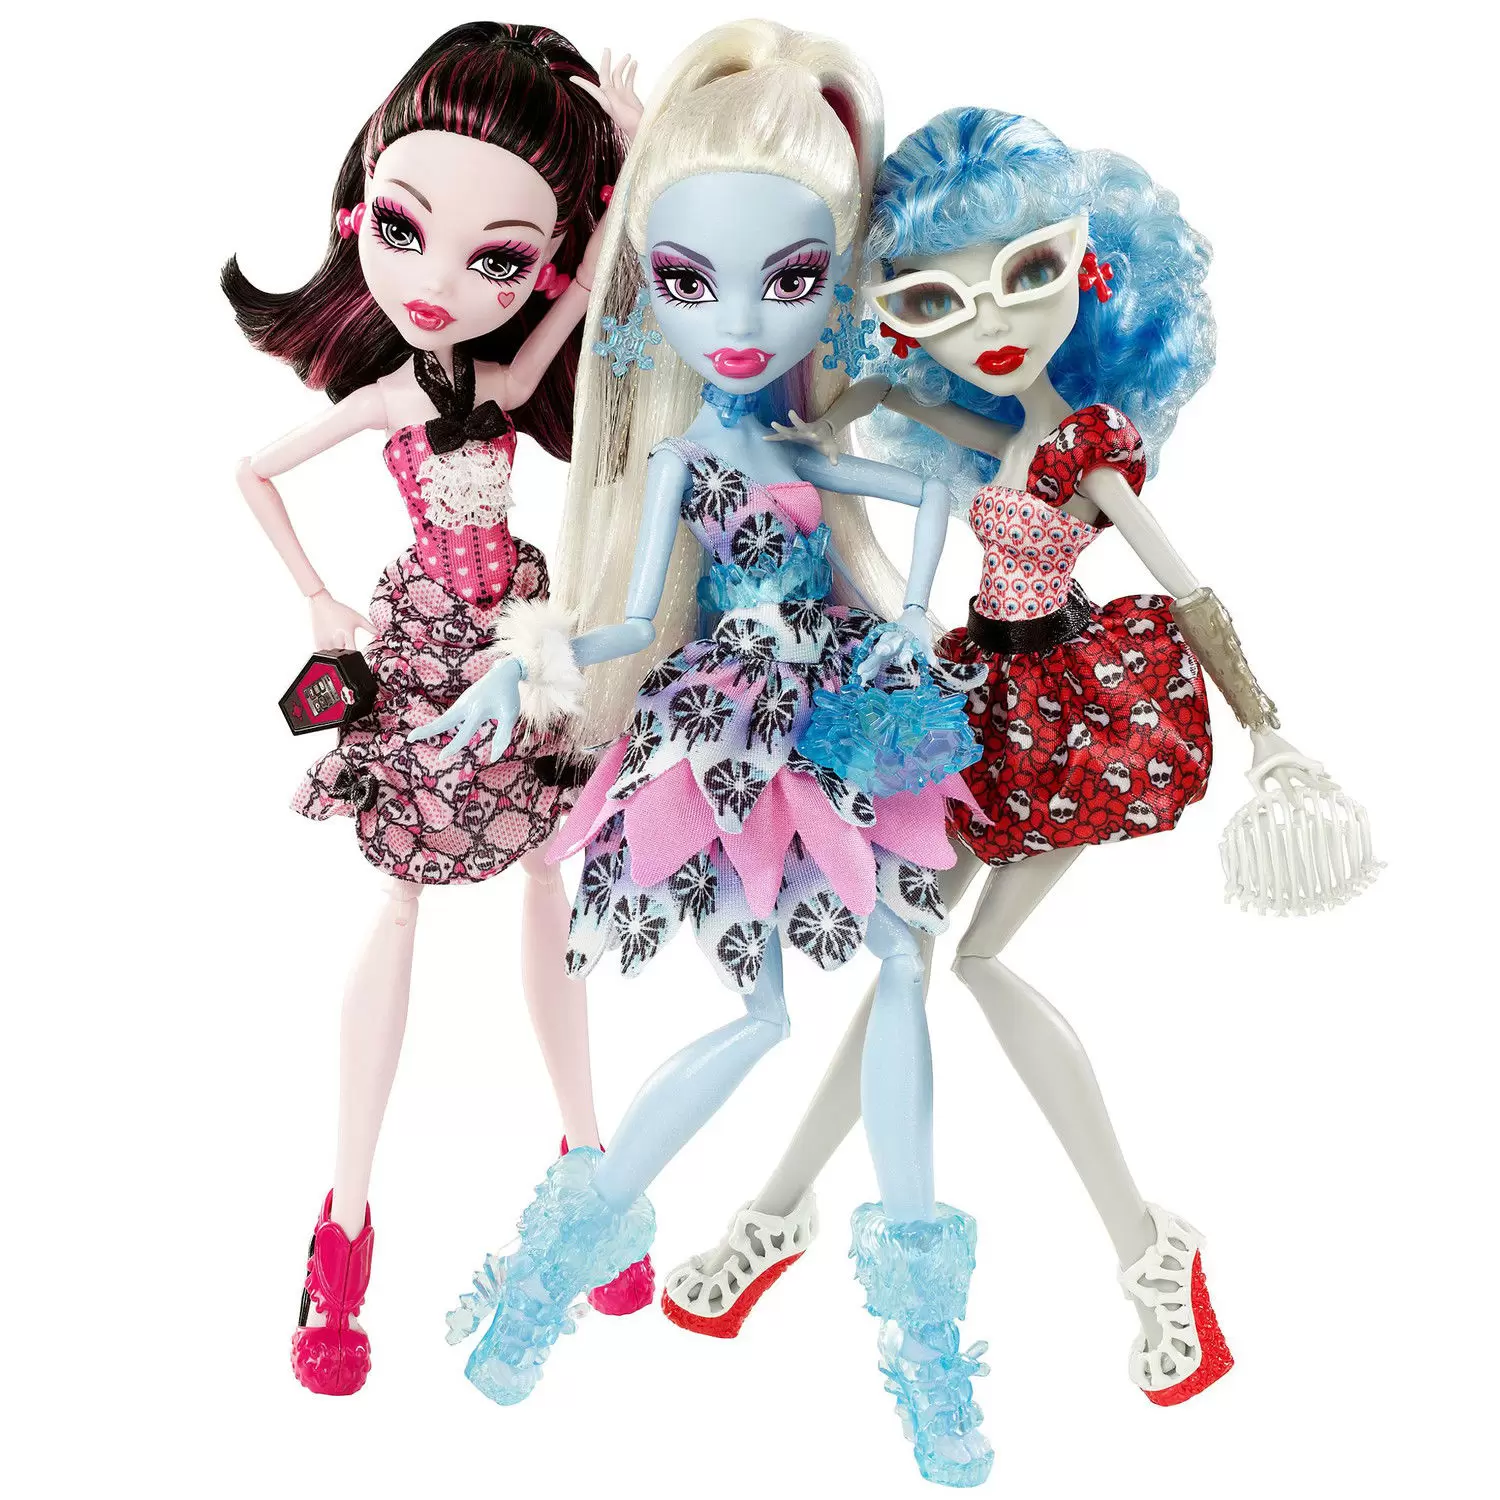 Monster High - Draculaura, Abbey Bominable & Ghoulia Yelps (3-pack) - Dot Dead Gorgeous